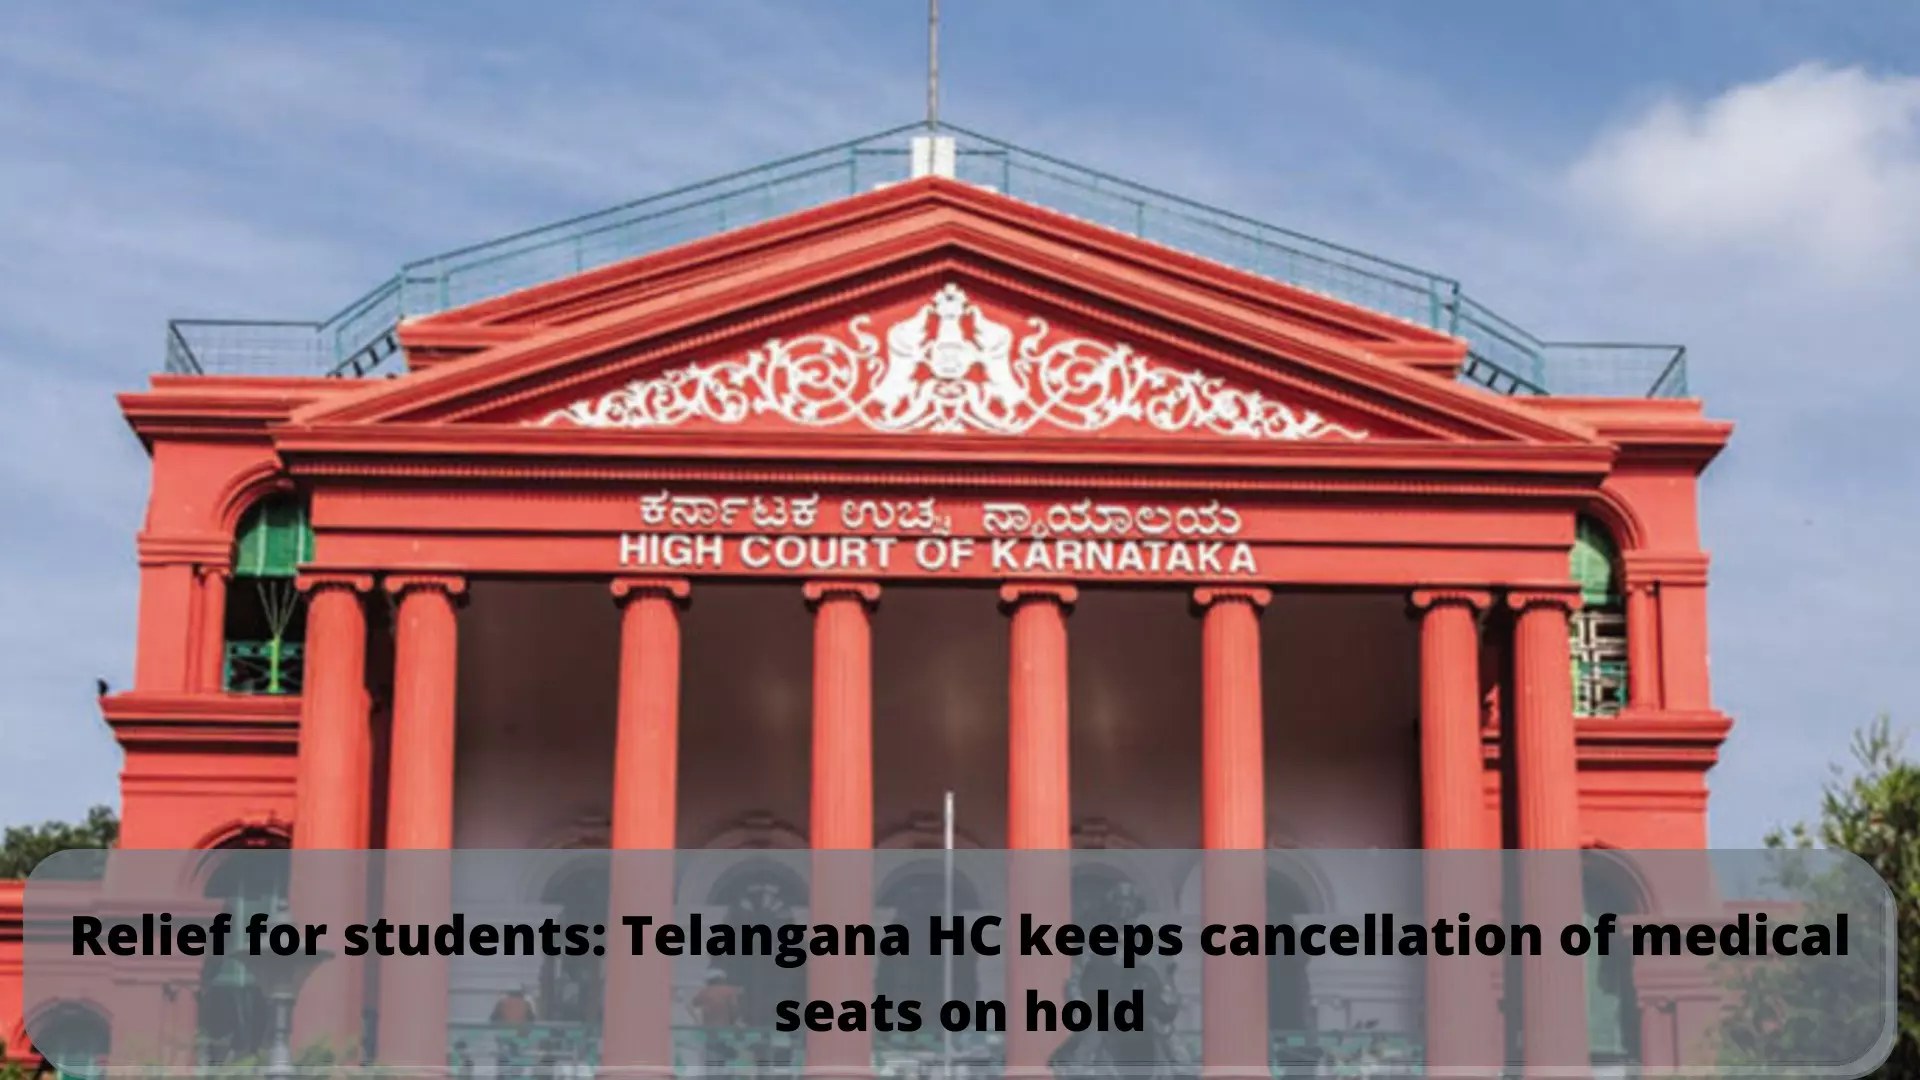 Relief for students: Telangana HC keeps cancellation of medical seats on hold